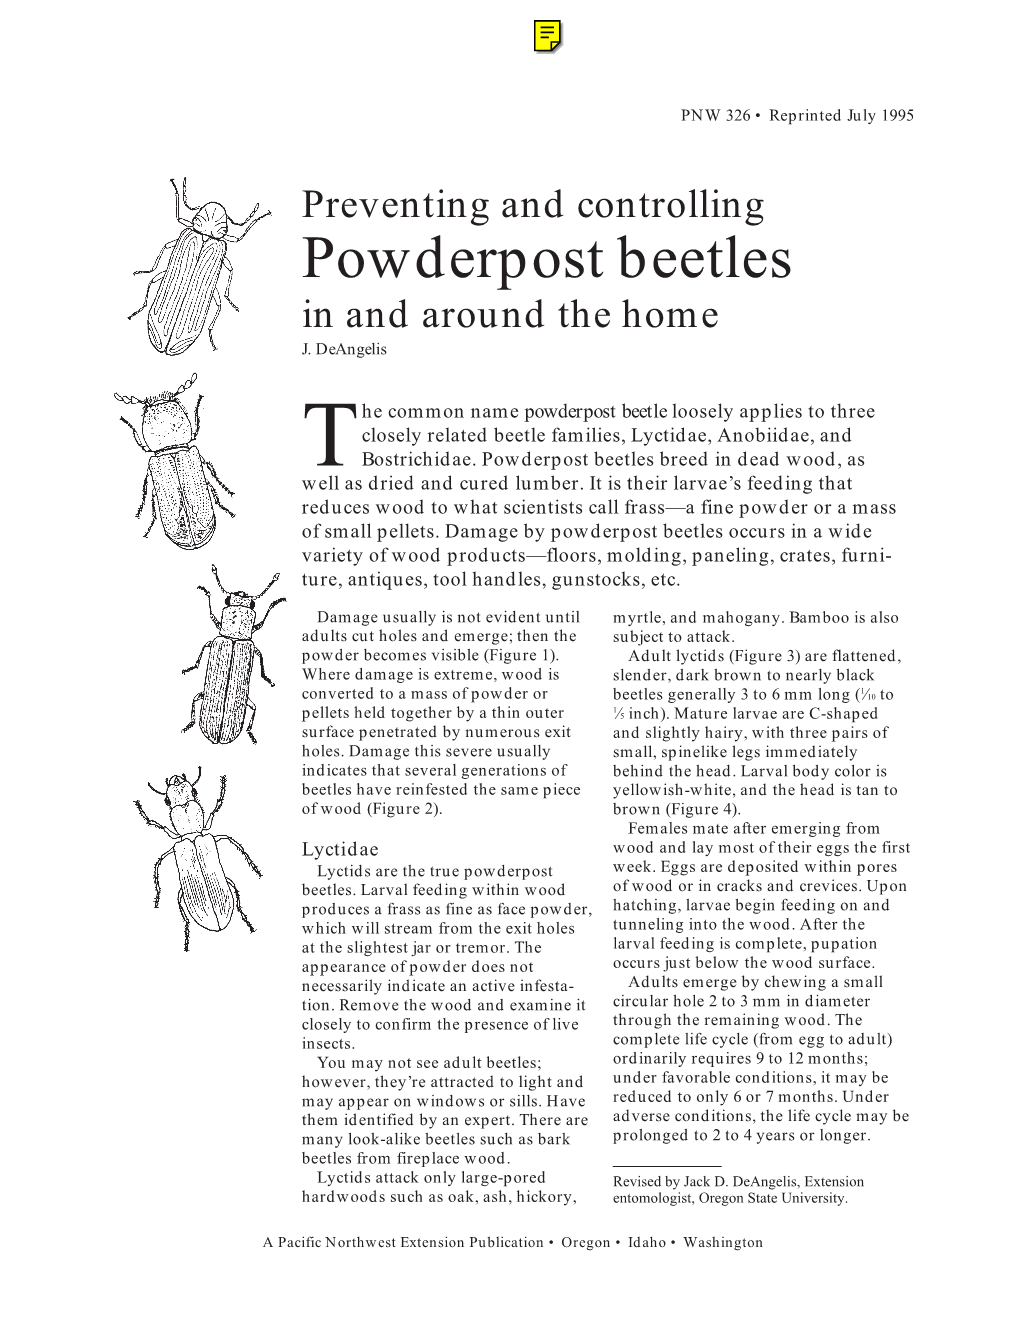 Preventing and Controlling Powderpost Beetles in and Around the Home J